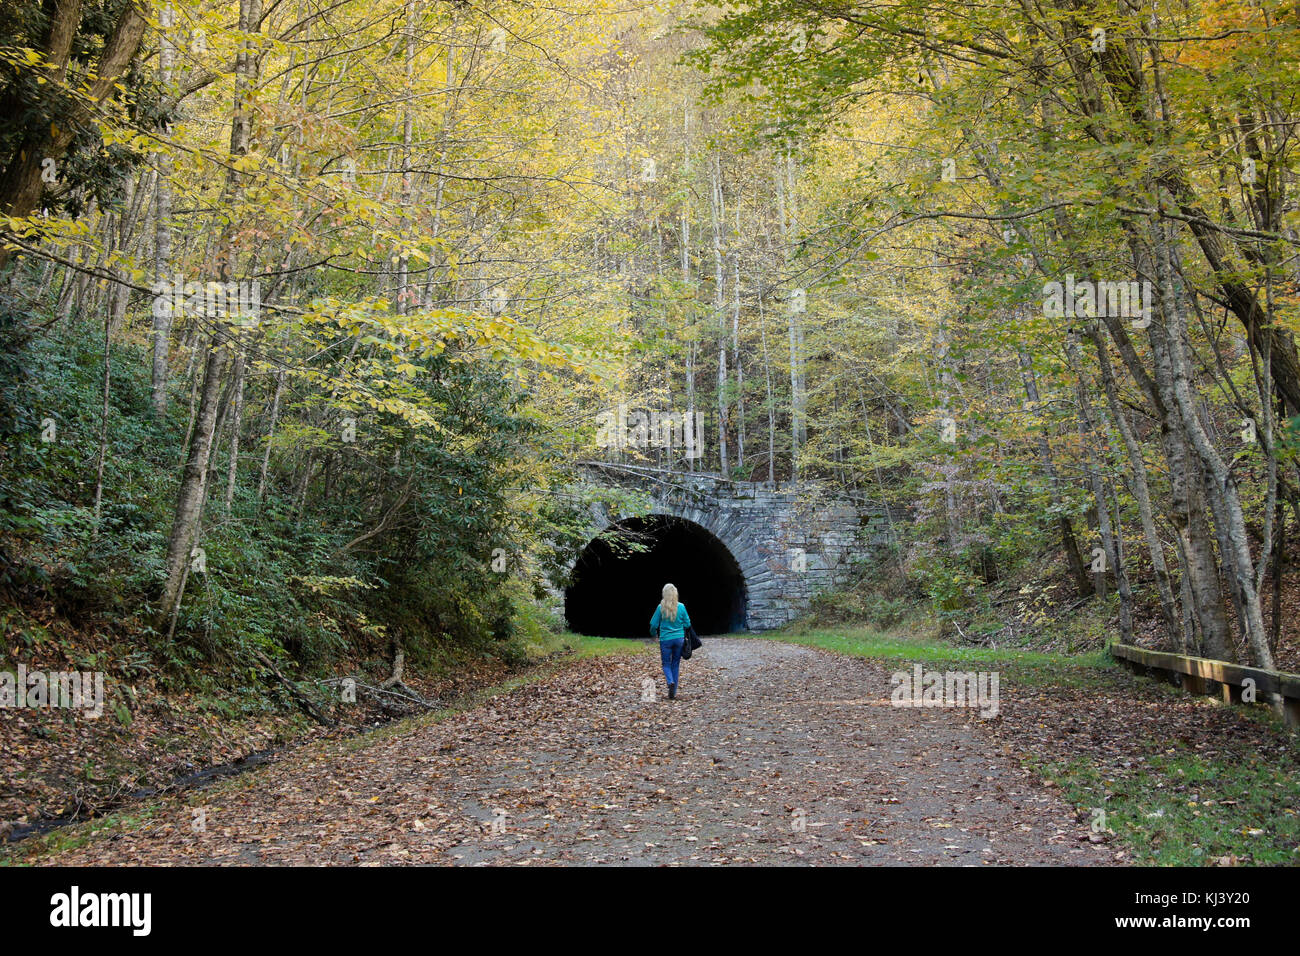 Tunnel at the end of The Road to Nowhere near Bryson City, Swain County, North Carolina Stock Photo